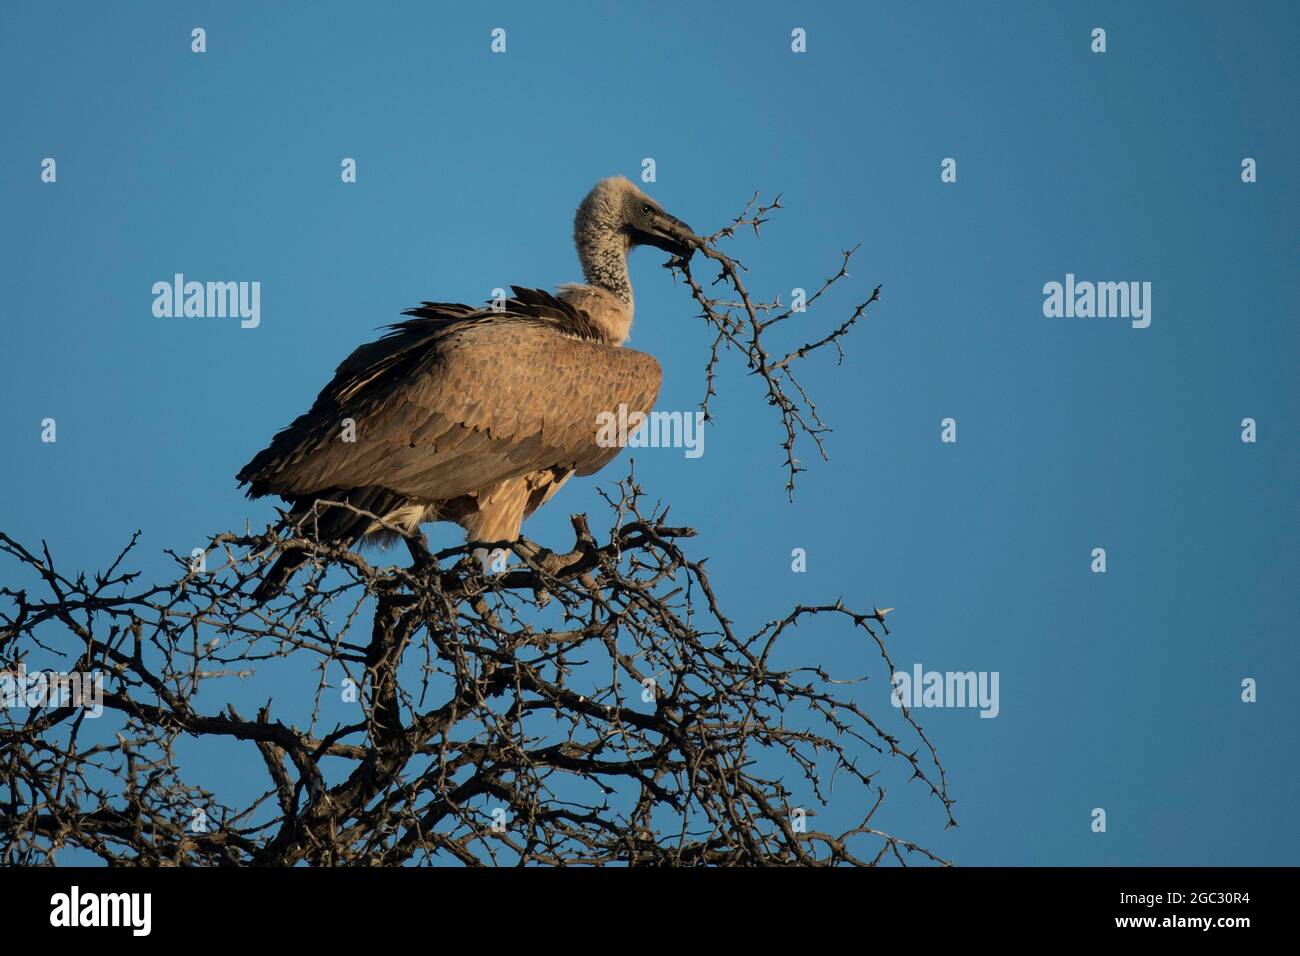 White-backed vulture, Gyps africanus, Kgalagadi Transfrontier Park, South Africa Stock Photo